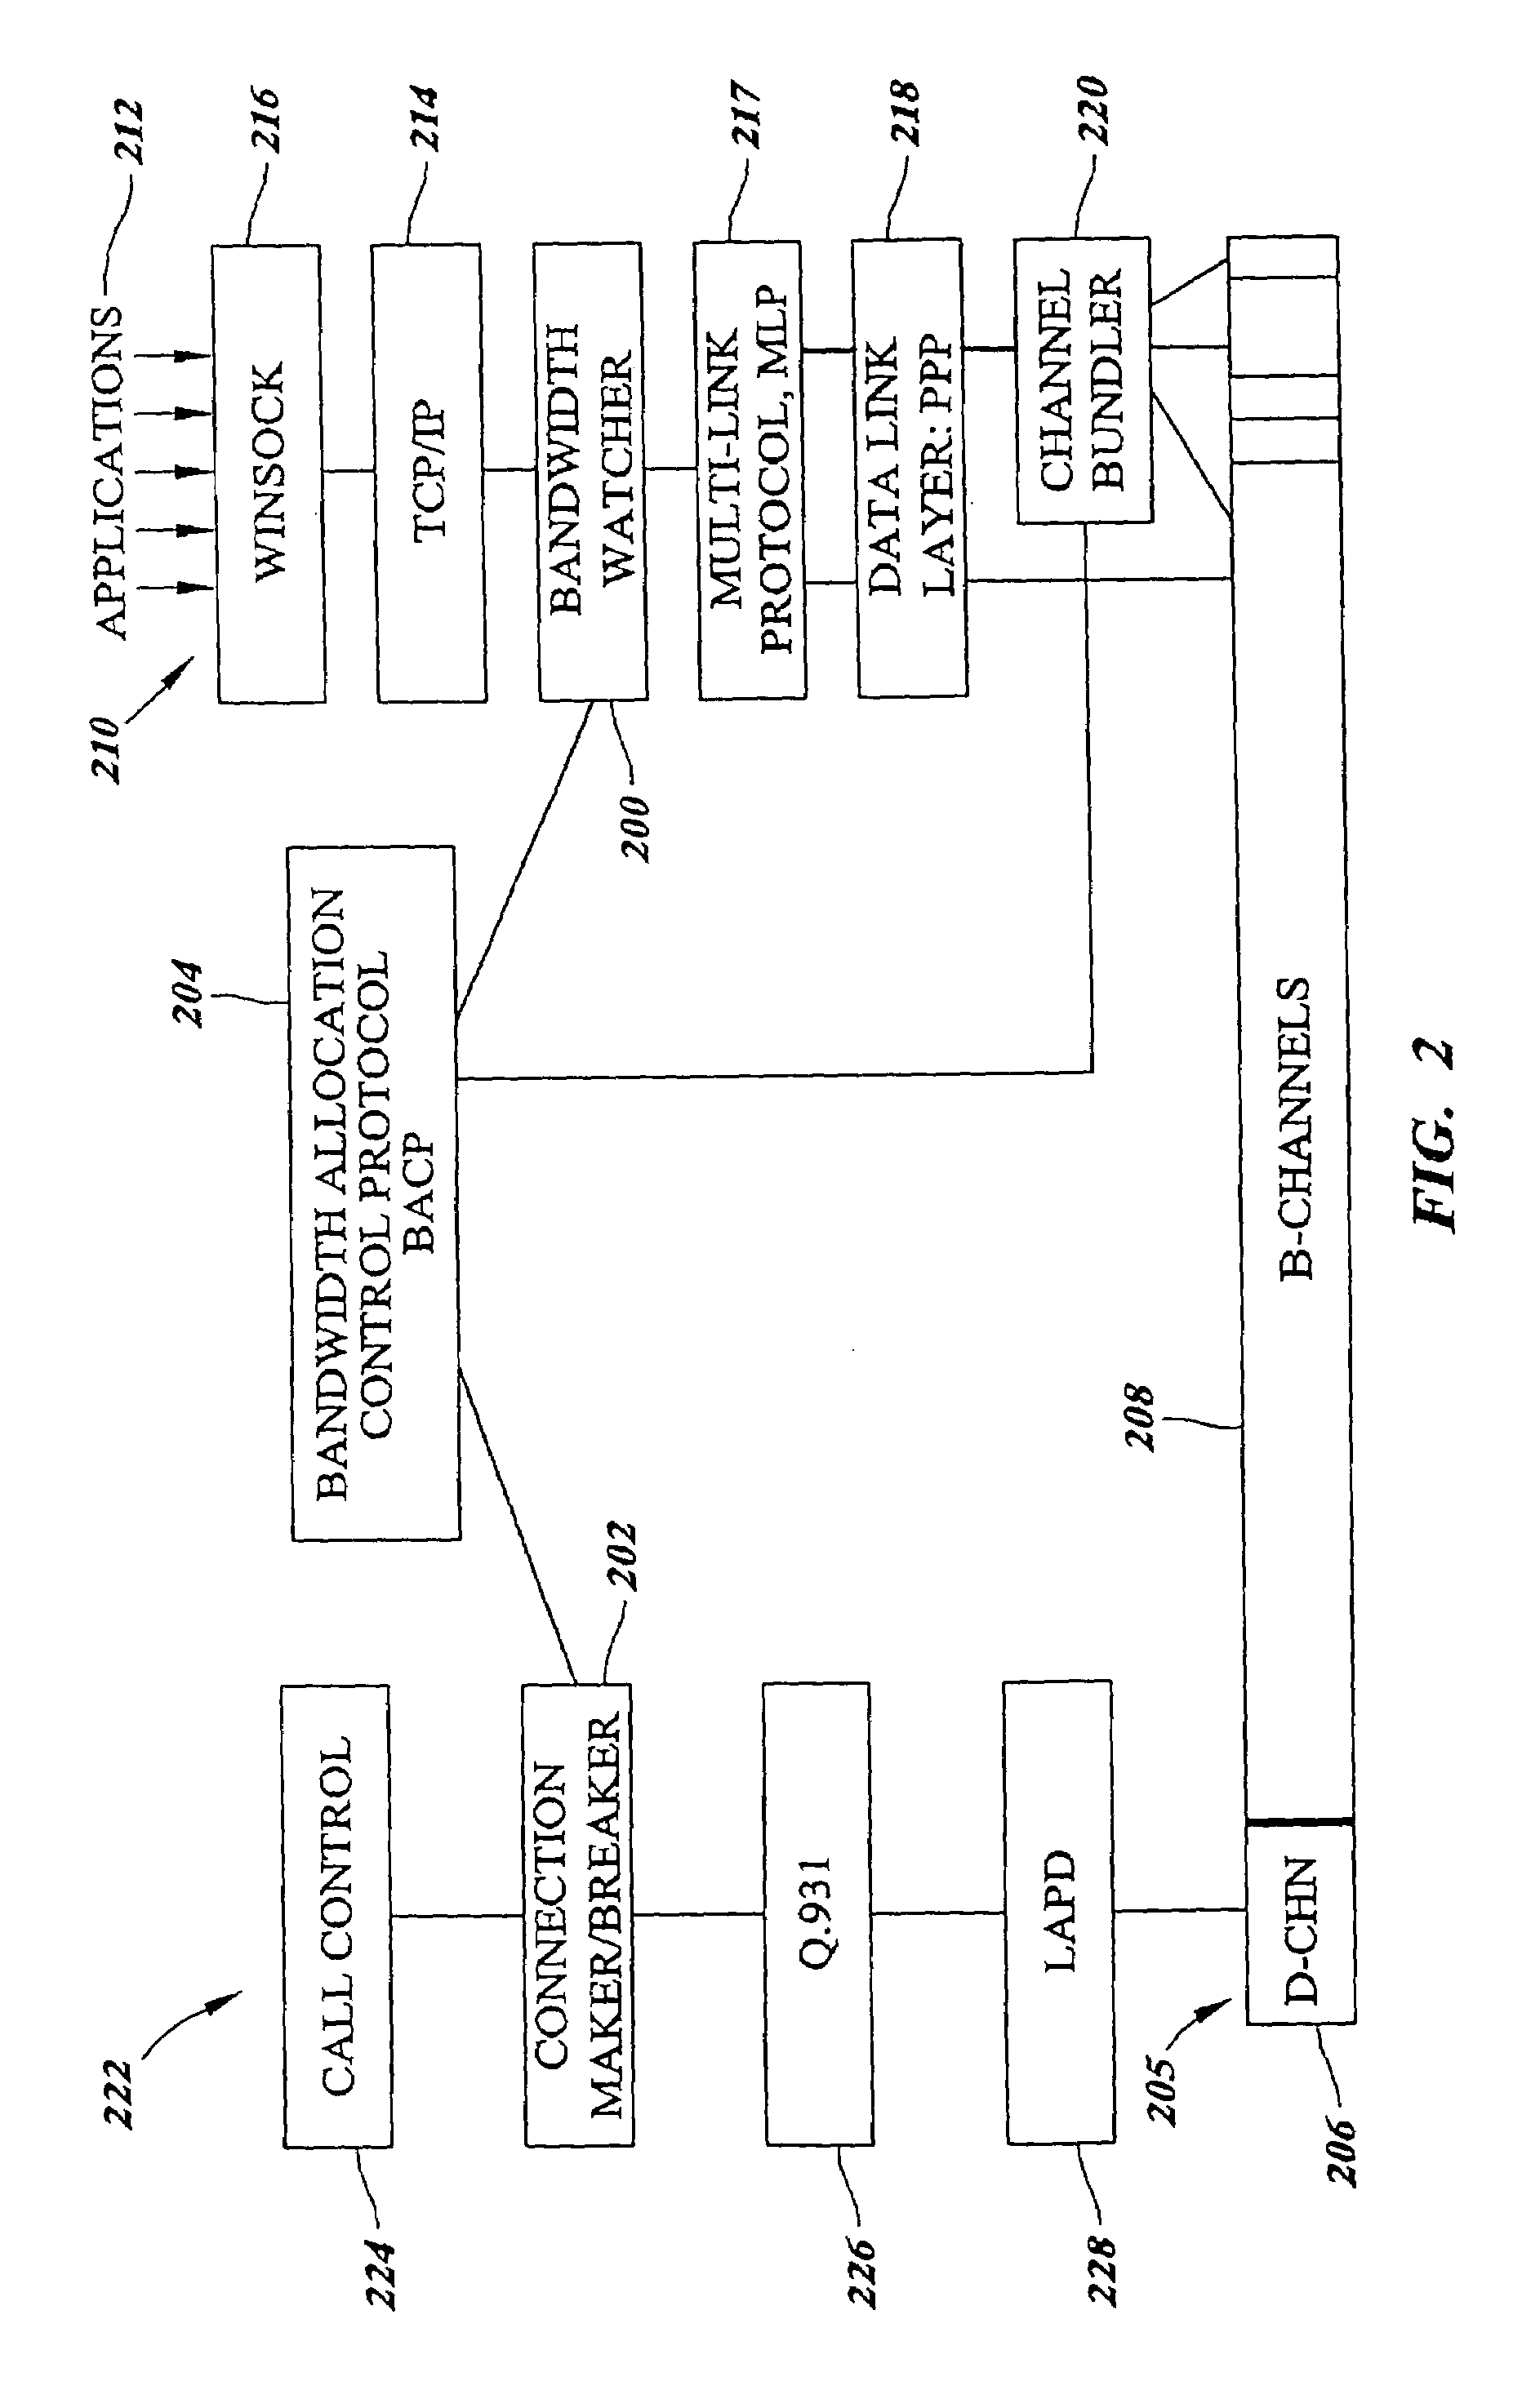 System and method for dynamically varying integrated services digital network (isdn) interface bandwidth